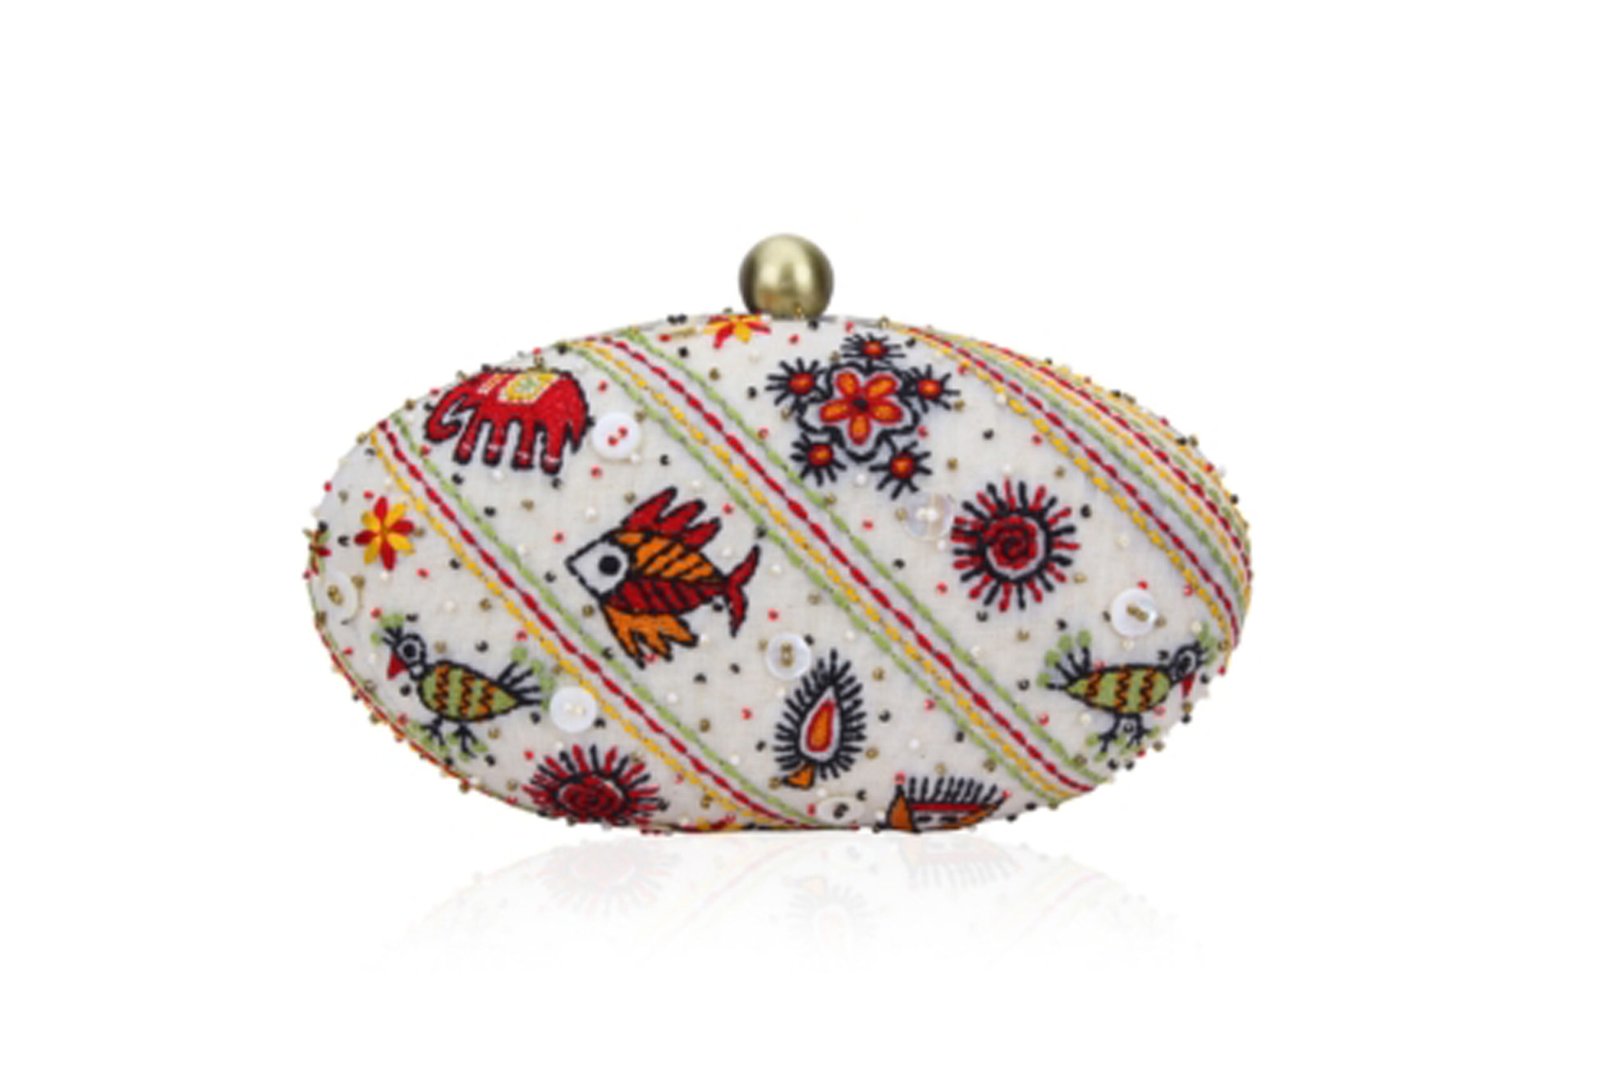 4.5 * 6  Small oval clutch with chain hanging